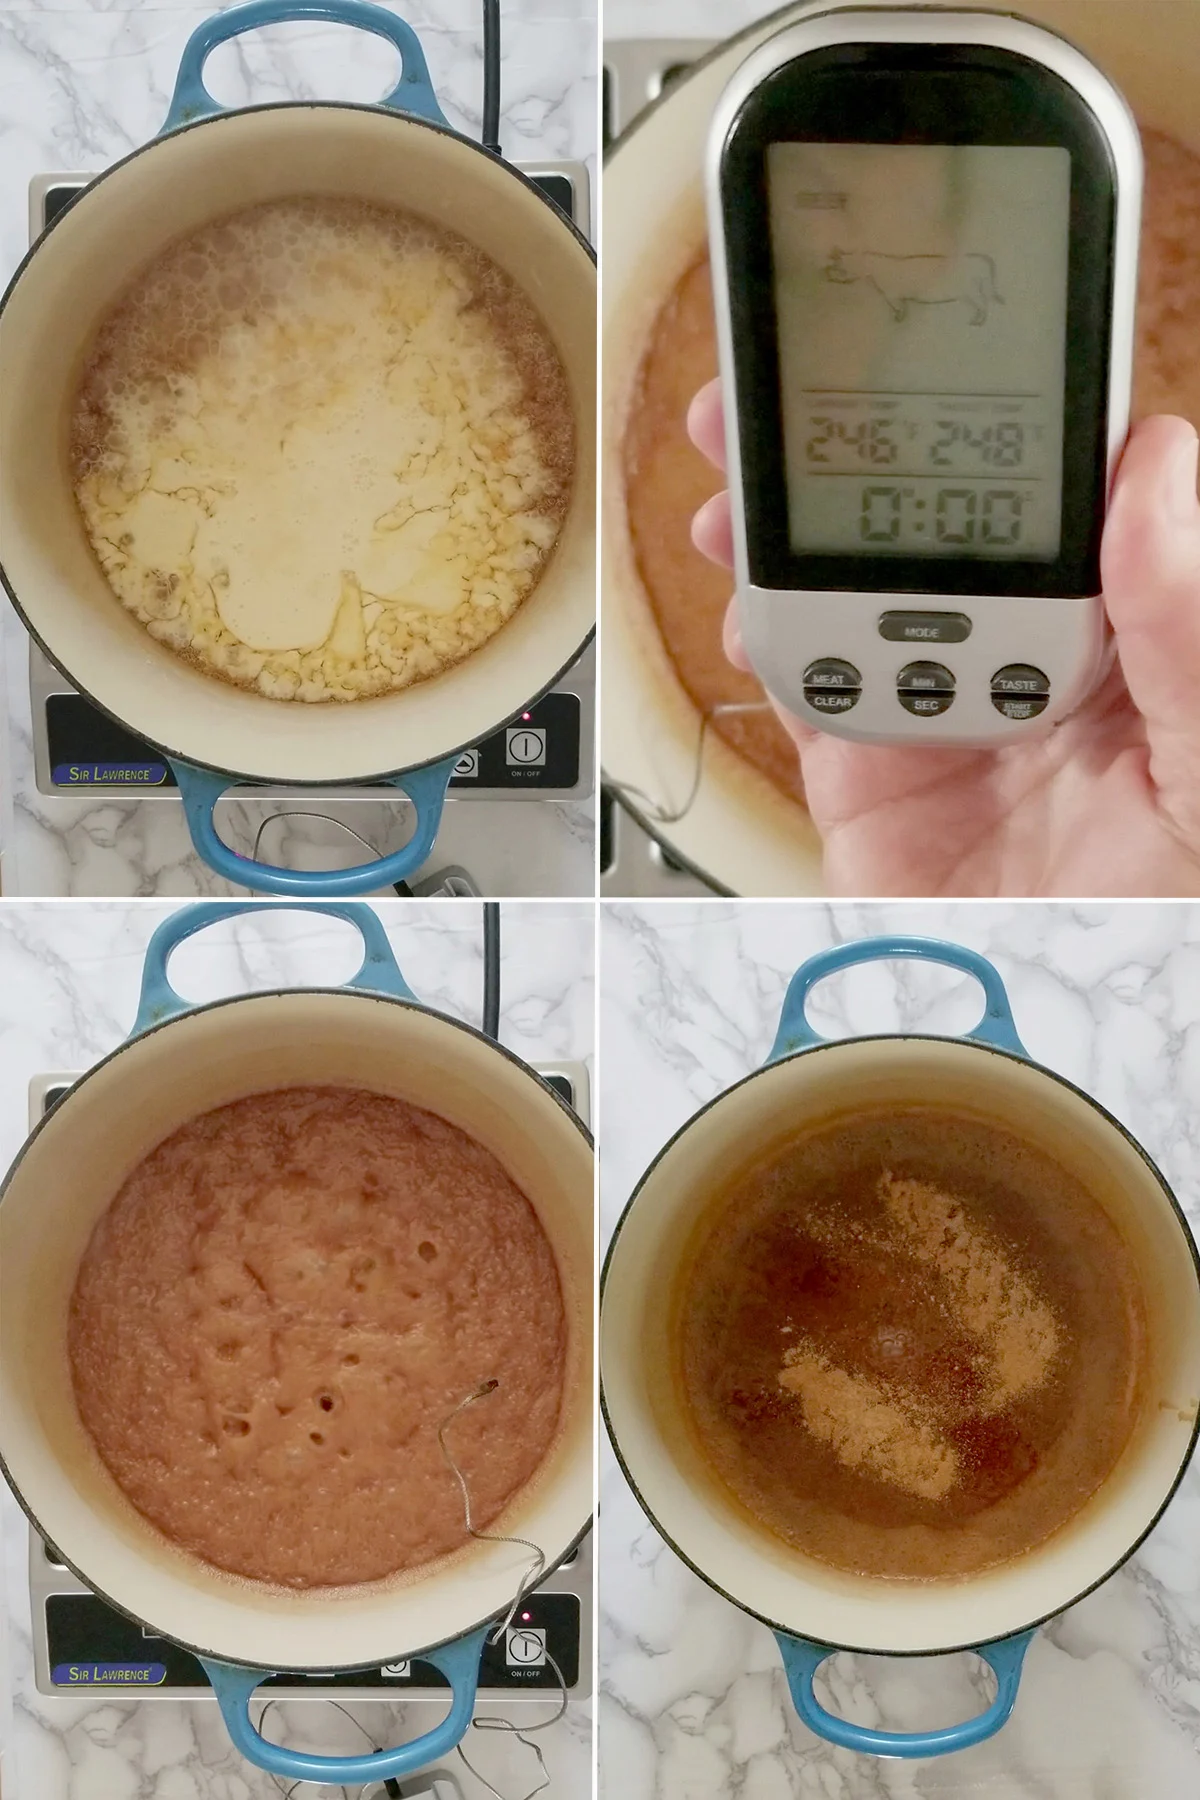 Caramel boiling. A thermometer.